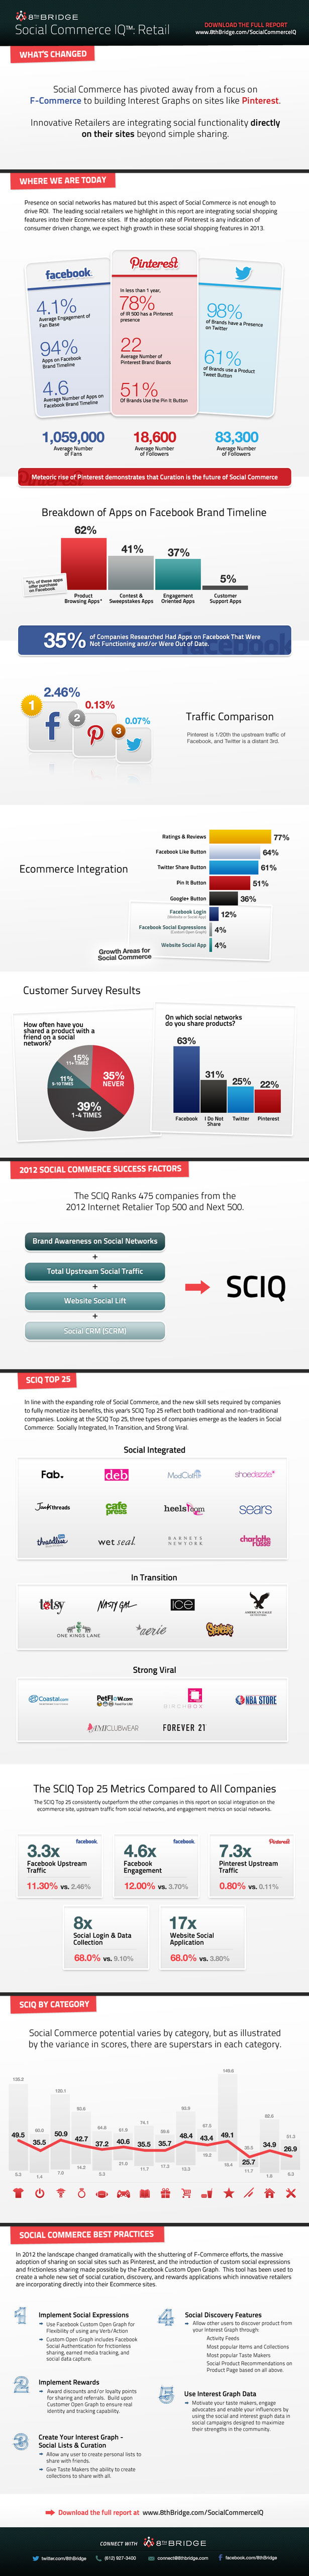 Social Commerce Trends 2013-Infographic